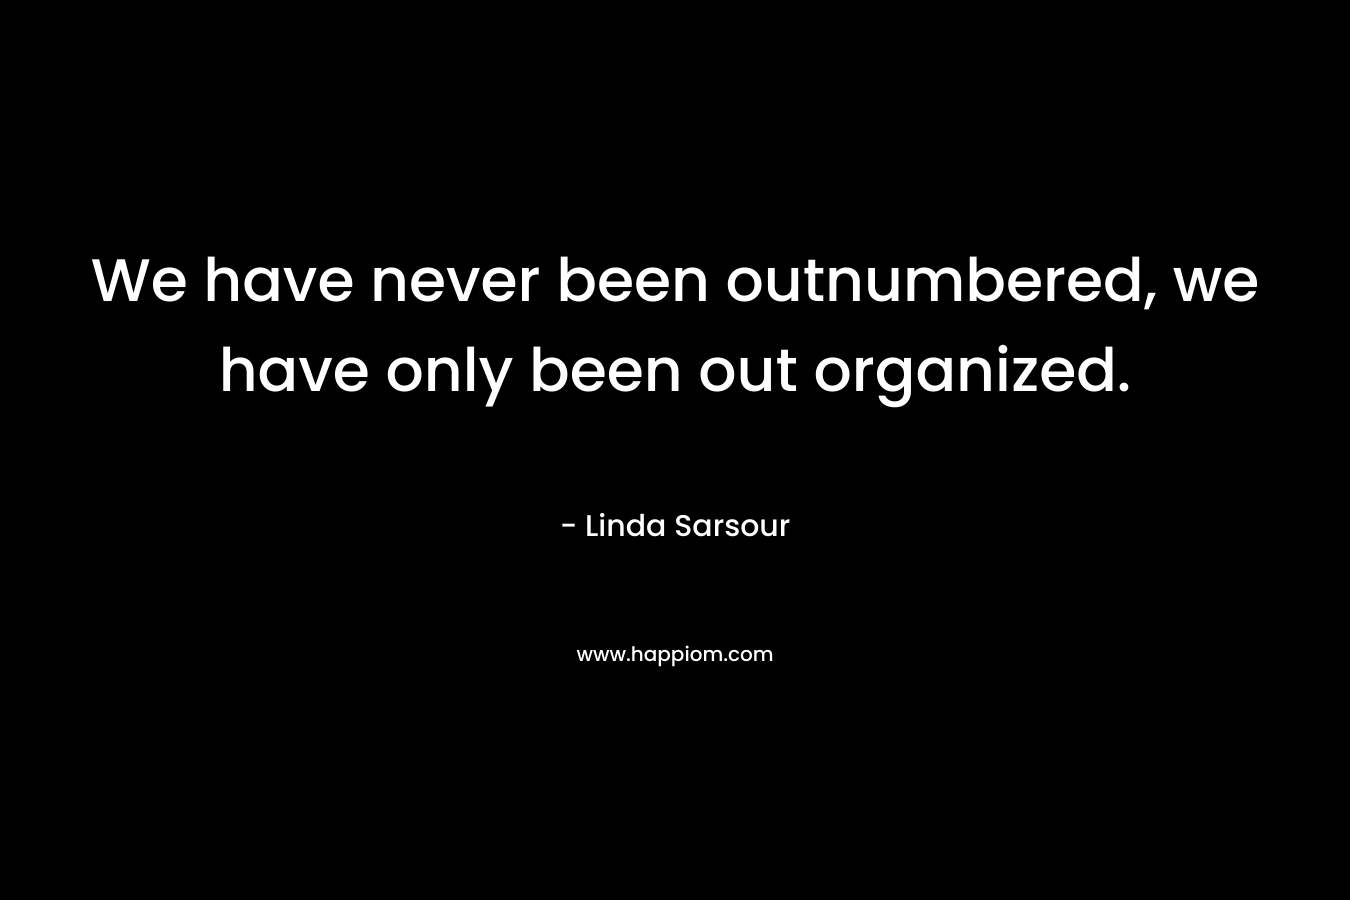 We have never been outnumbered, we have only been out organized.